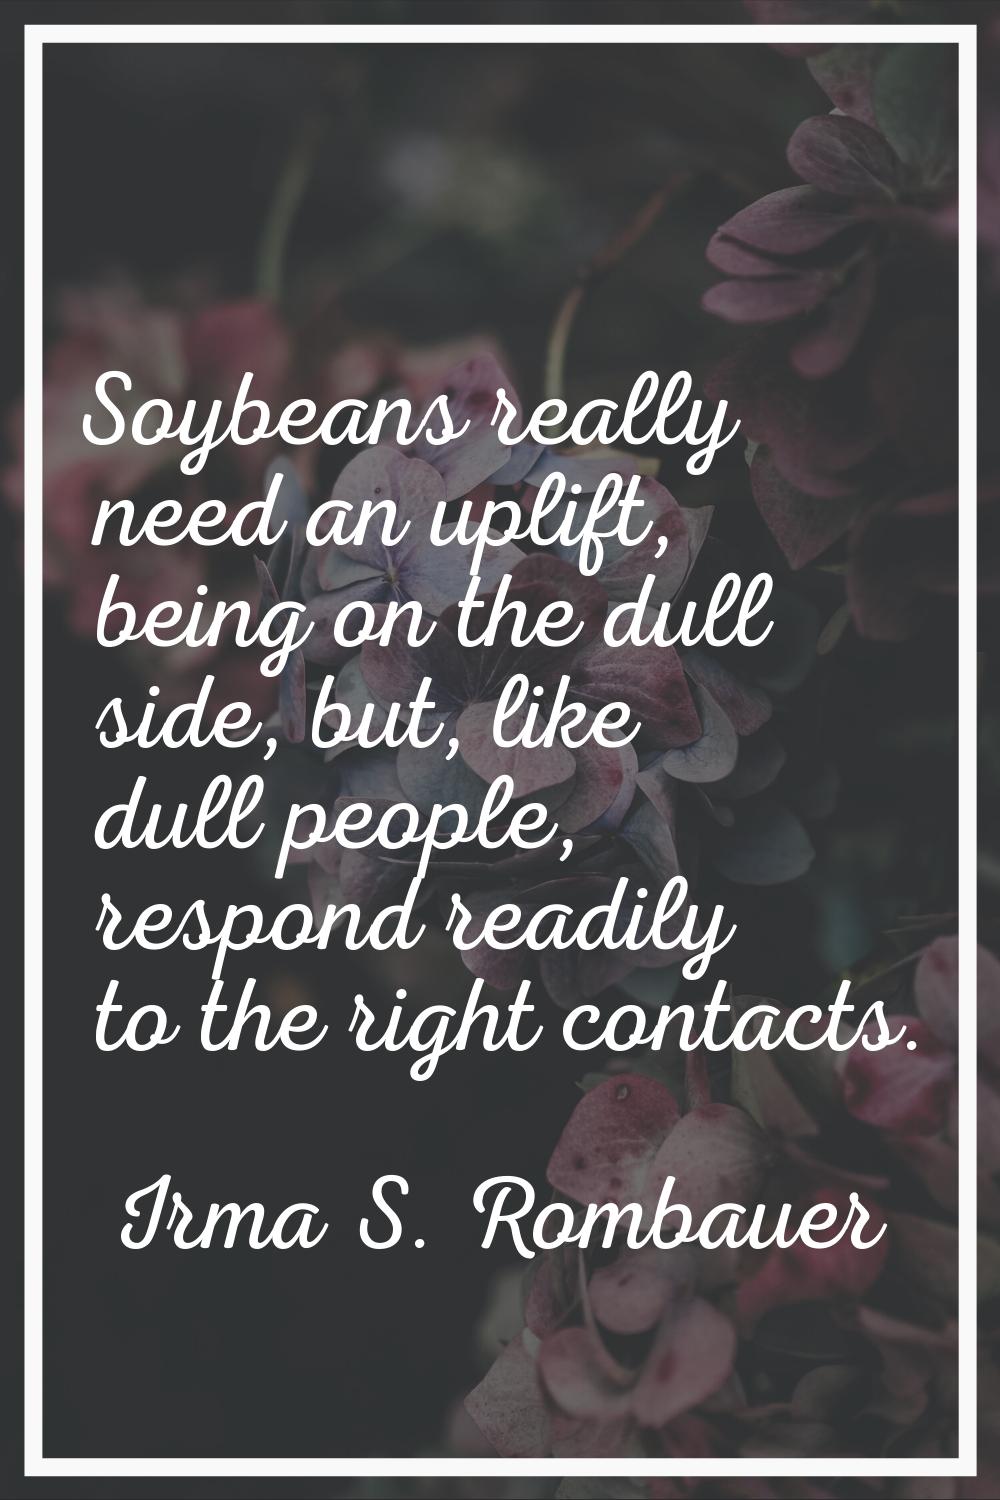 Soybeans really need an uplift, being on the dull side, but, like dull people, respond readily to t